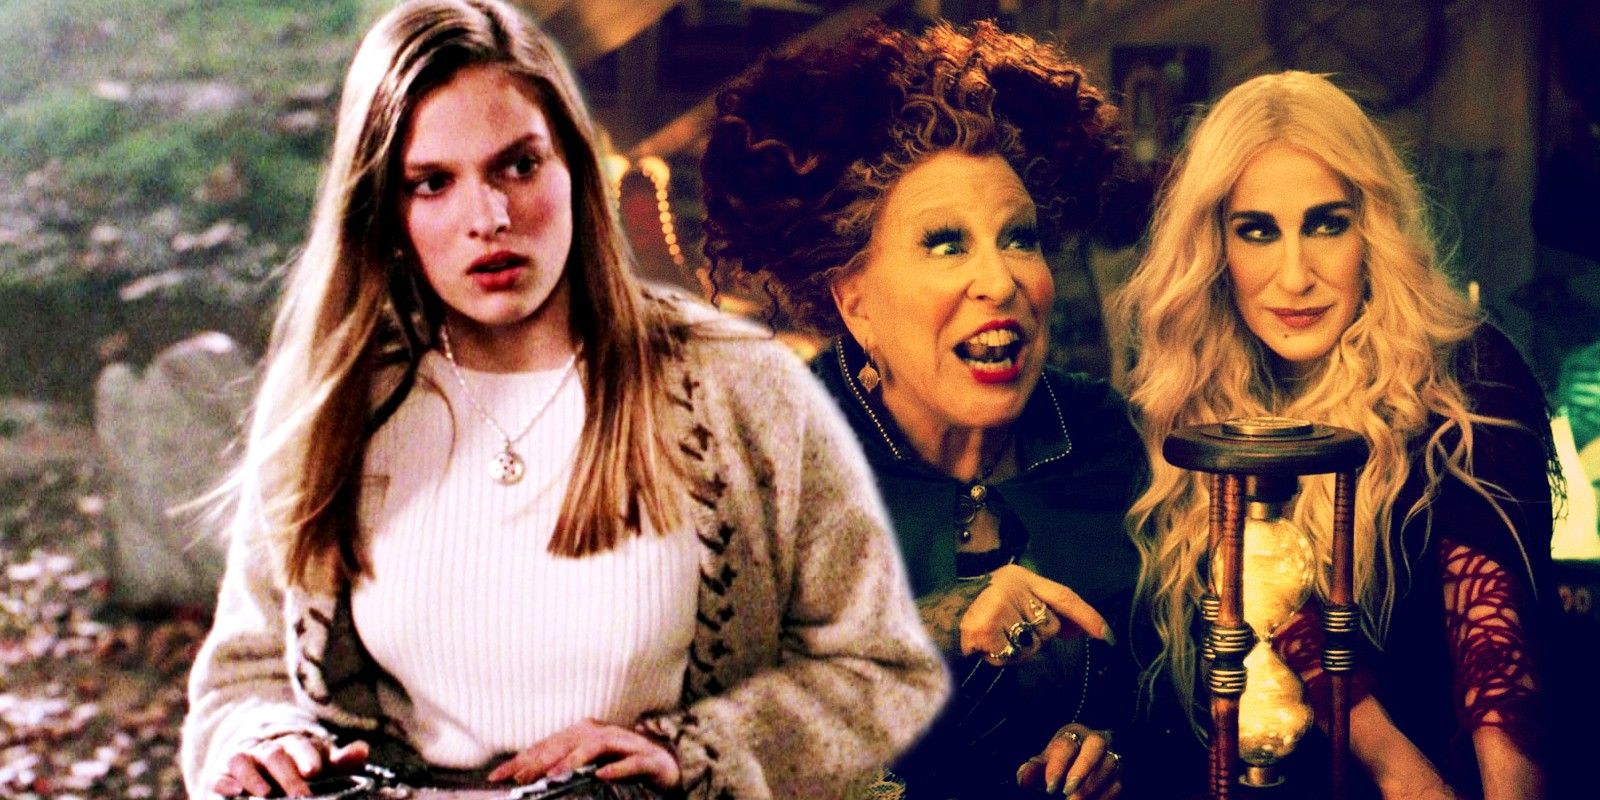 The Best Quotes From 'Hocus Pocus 2' as Instagram Captions